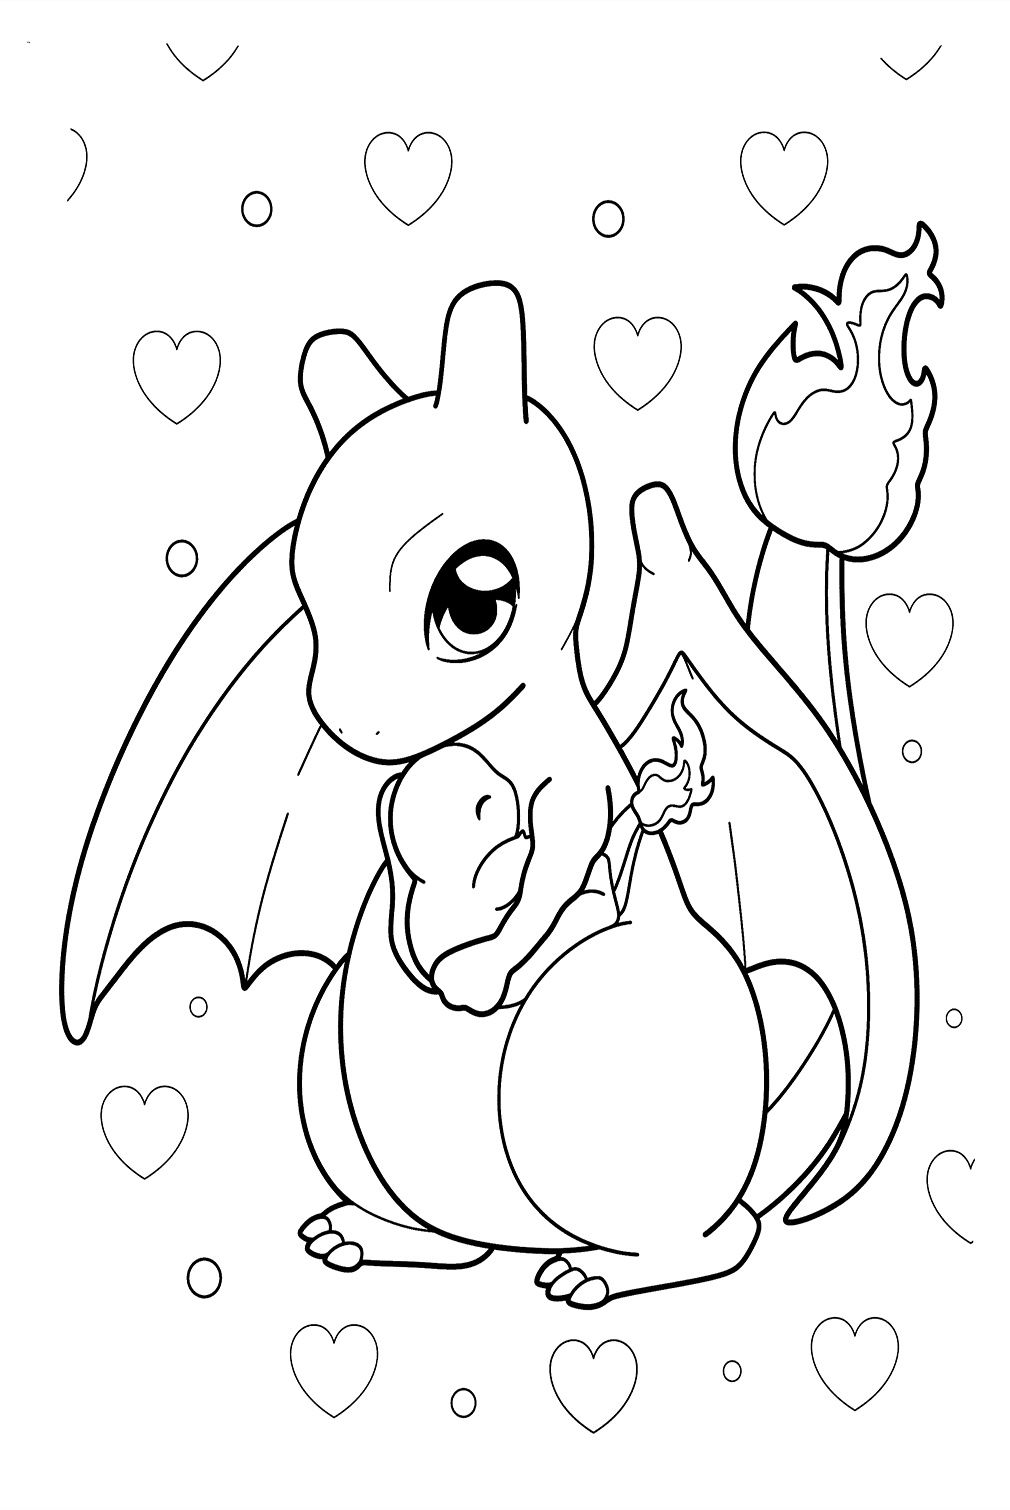 Cute Charizard Coloring Page from Charizard